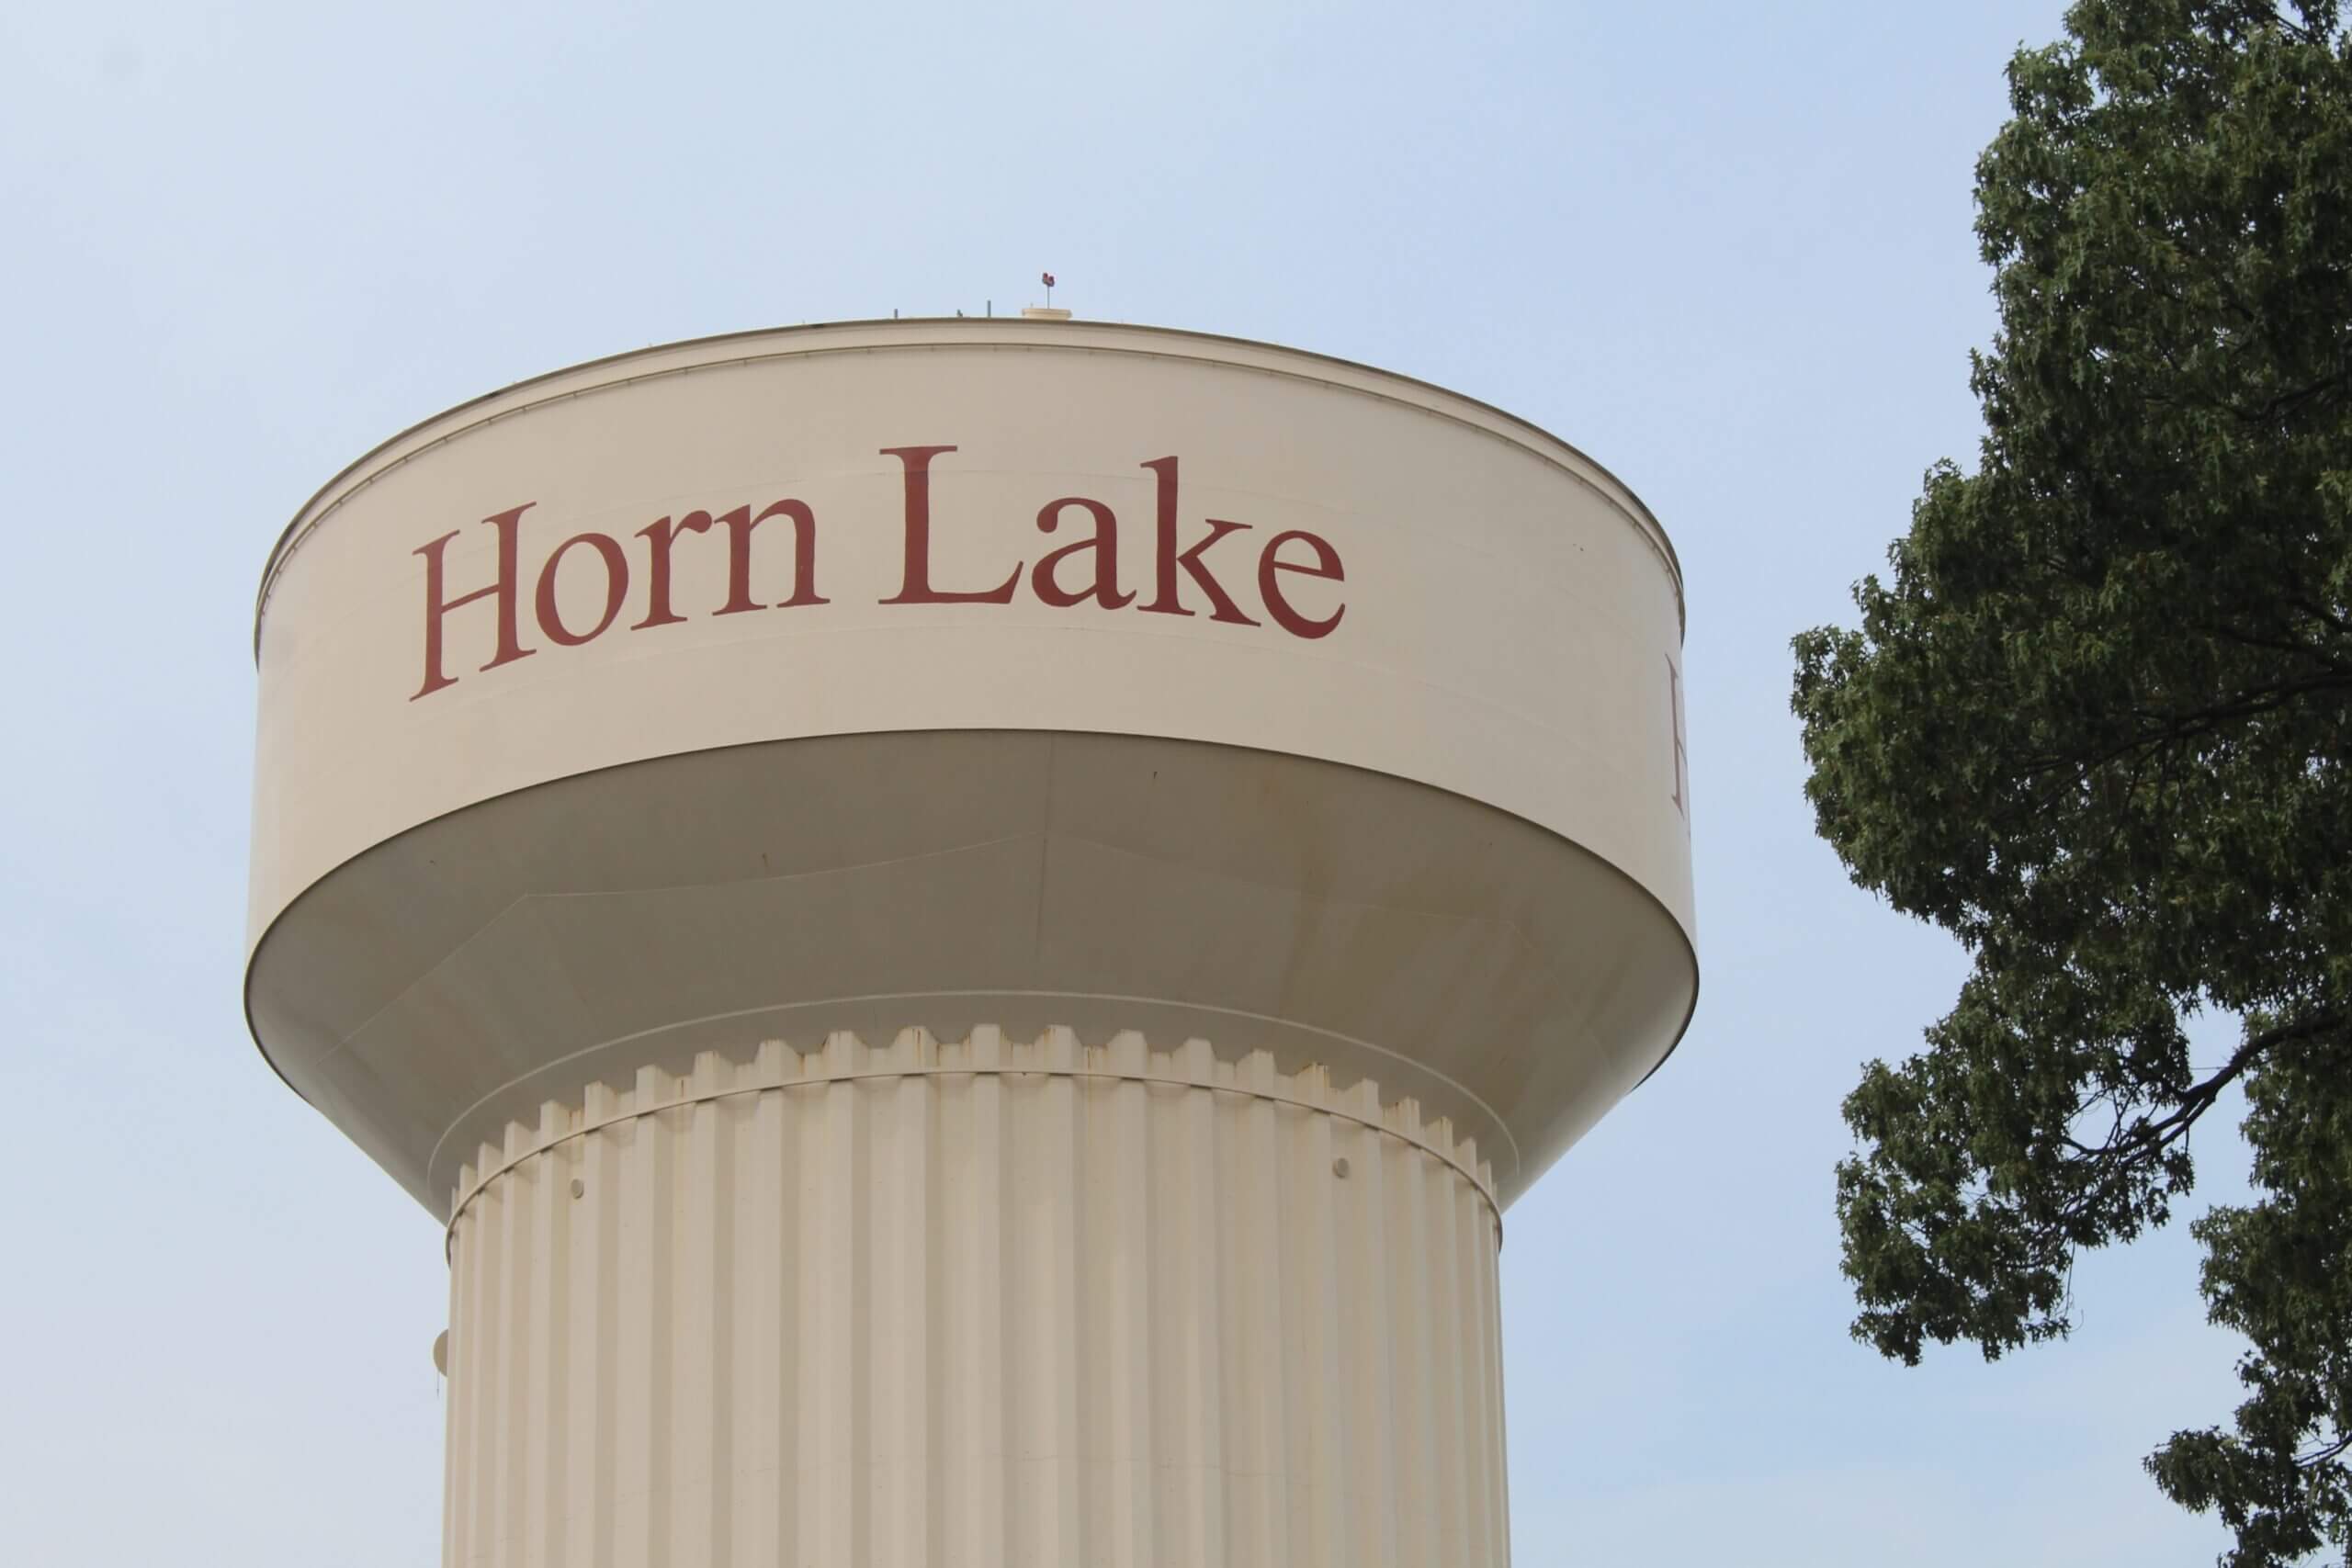 National Night Out kickoff event set for Horn Lake